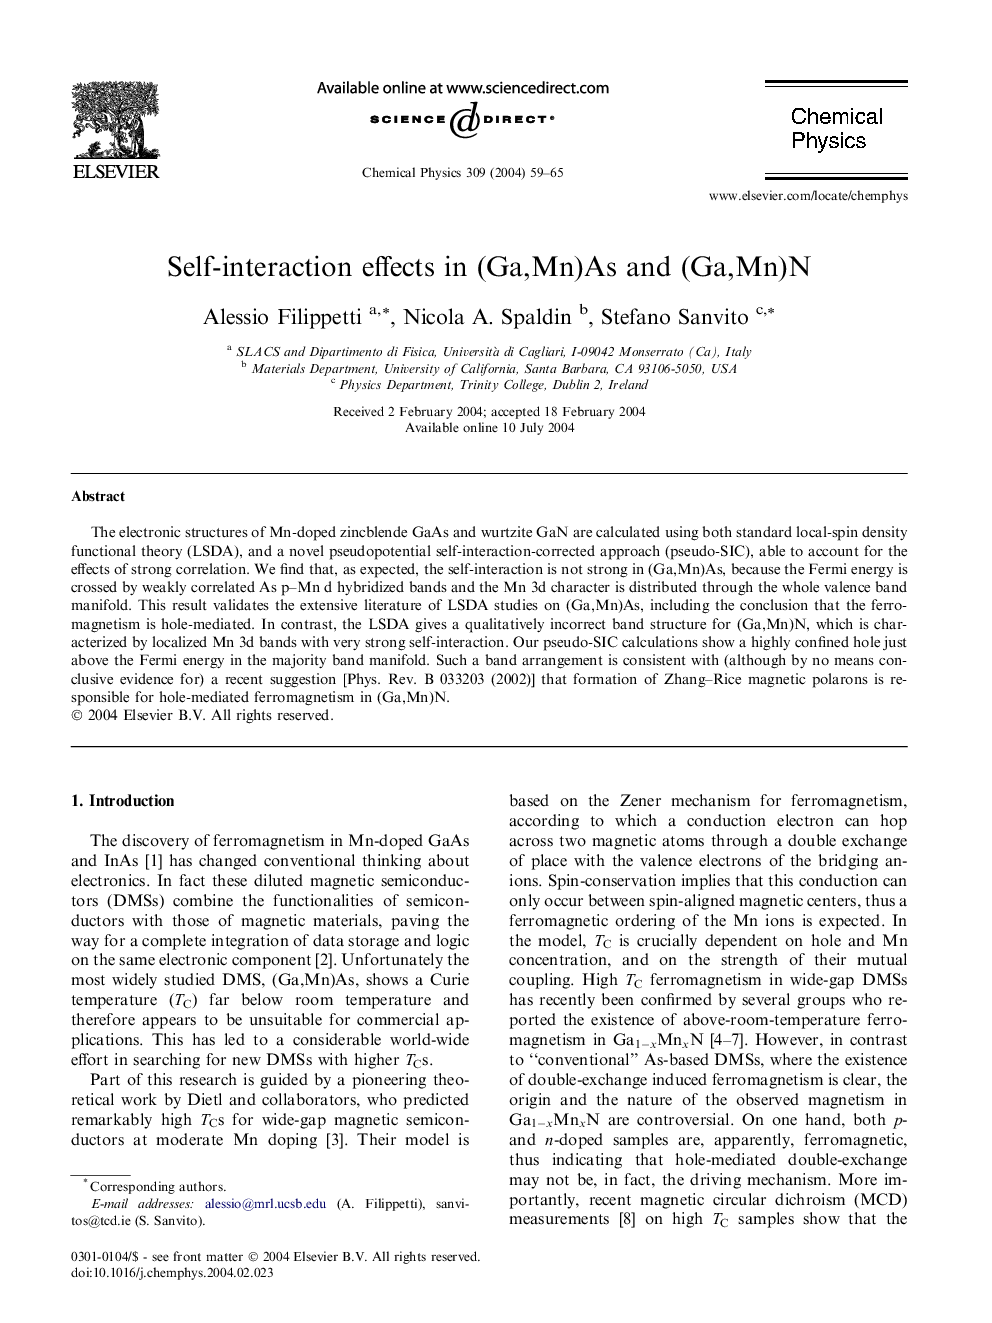 Self-interaction effects in (Ga,Mn)As and (Ga,Mn)N